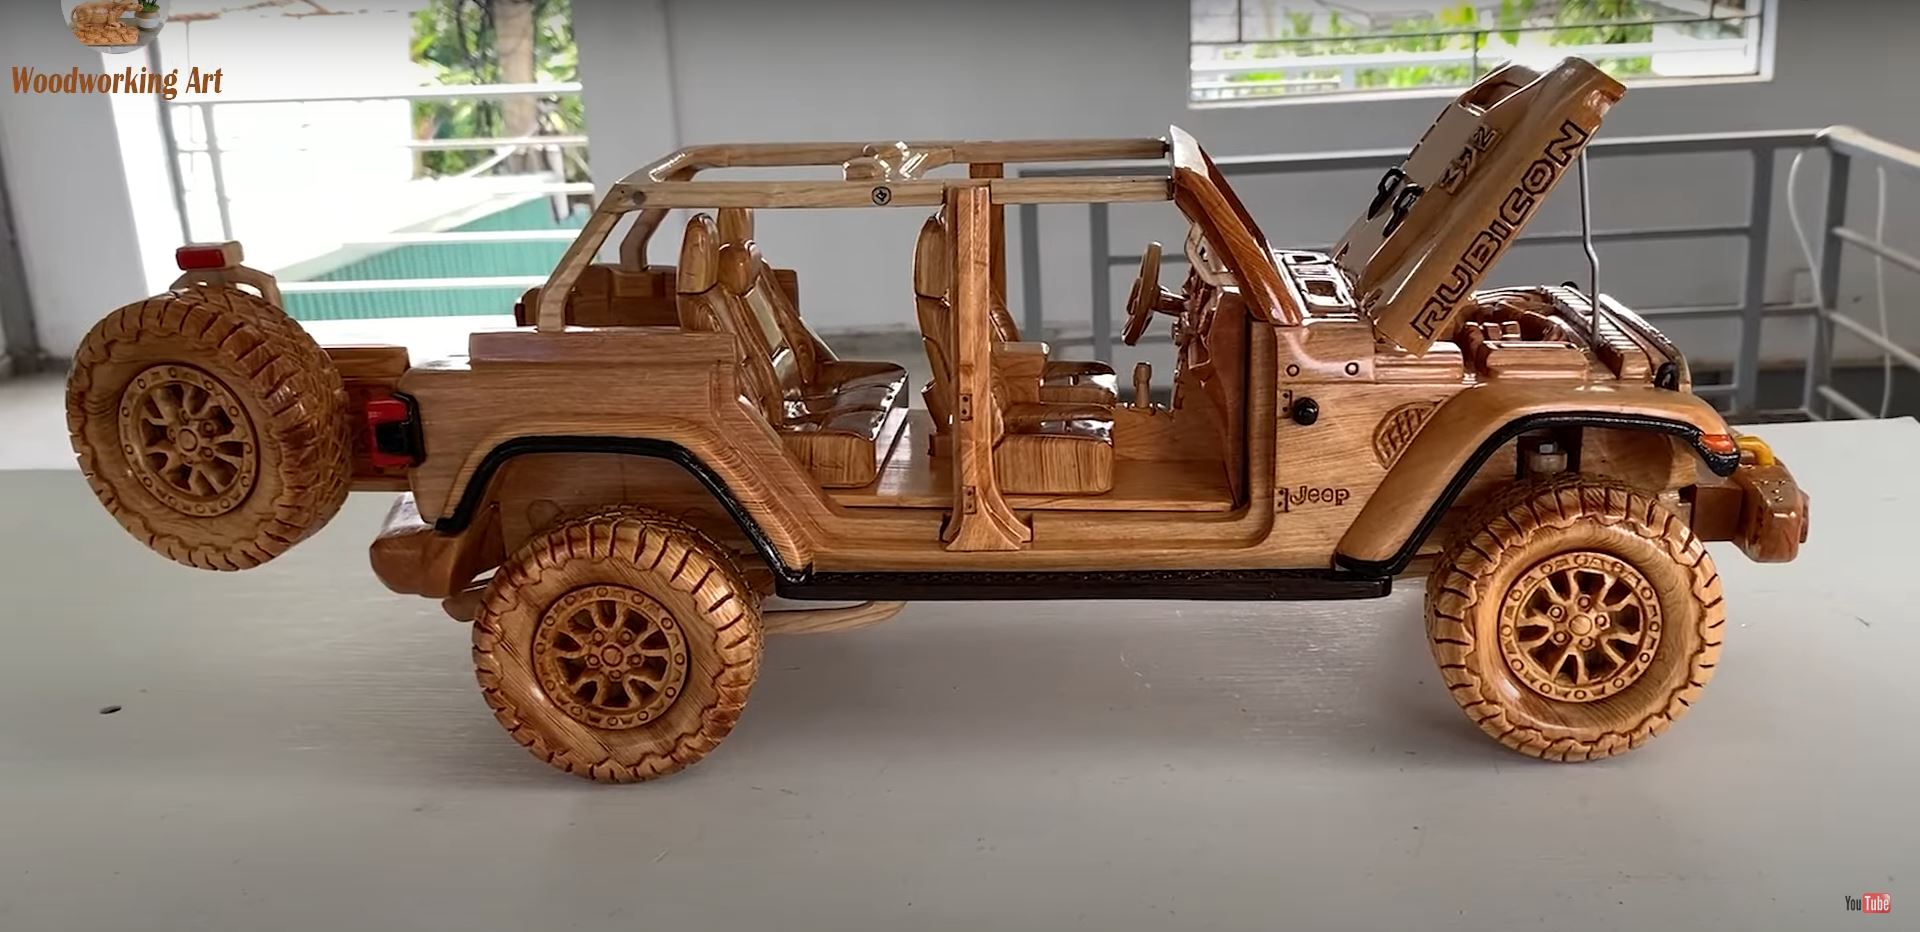 Wooden Block Turns To Jeep Wrangler 392